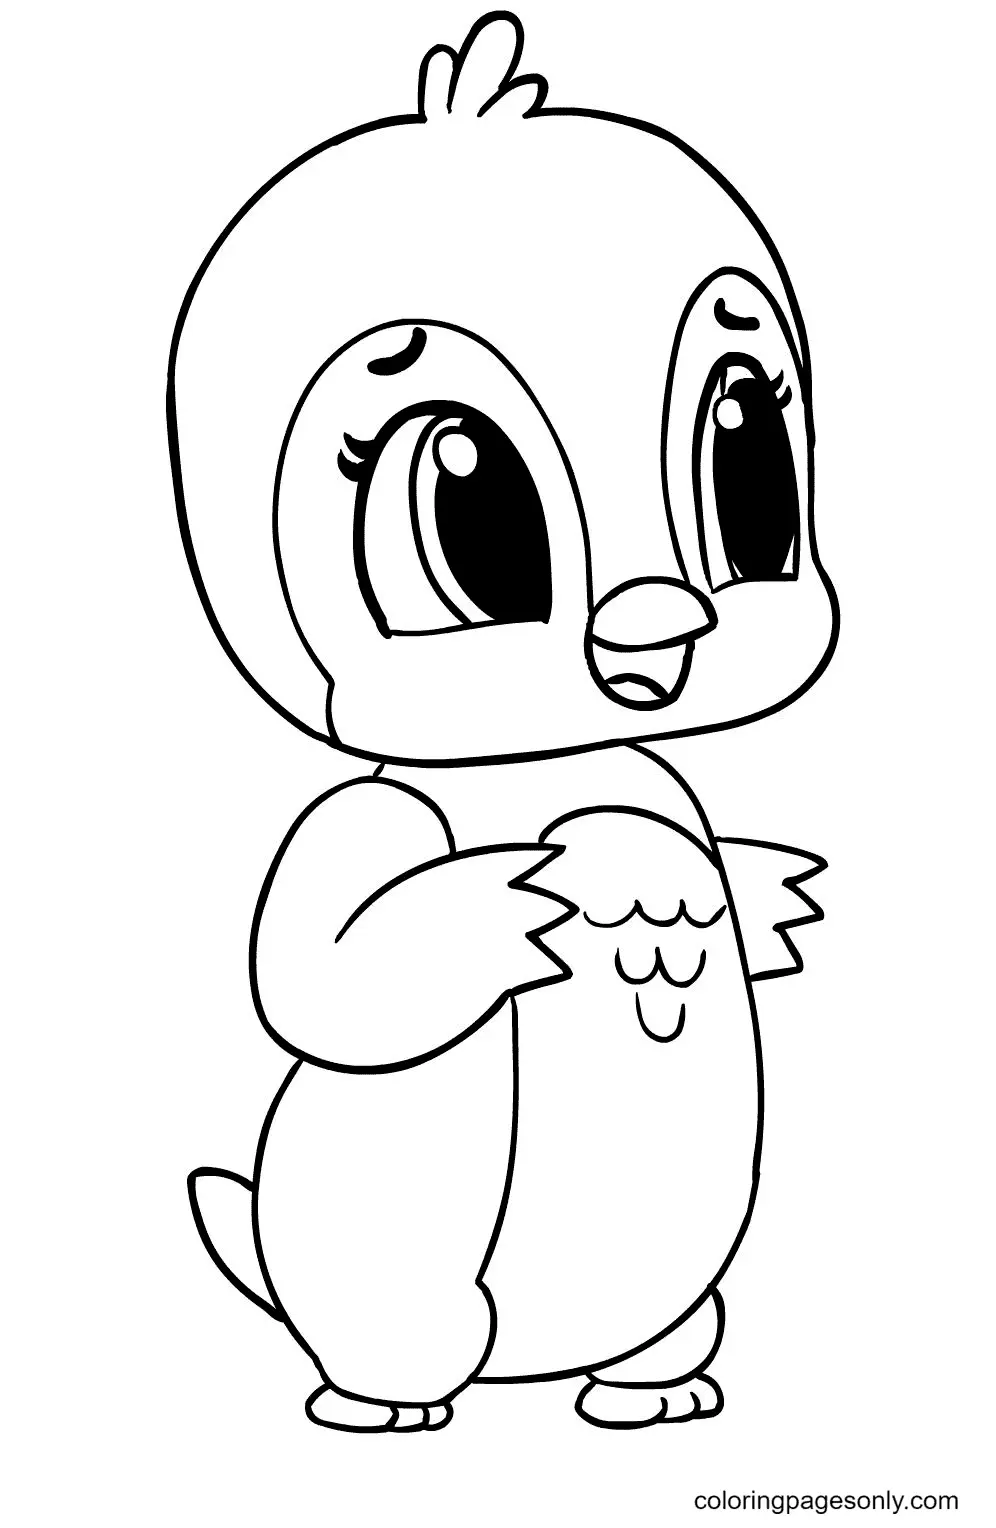 Penguin Coloring Pages